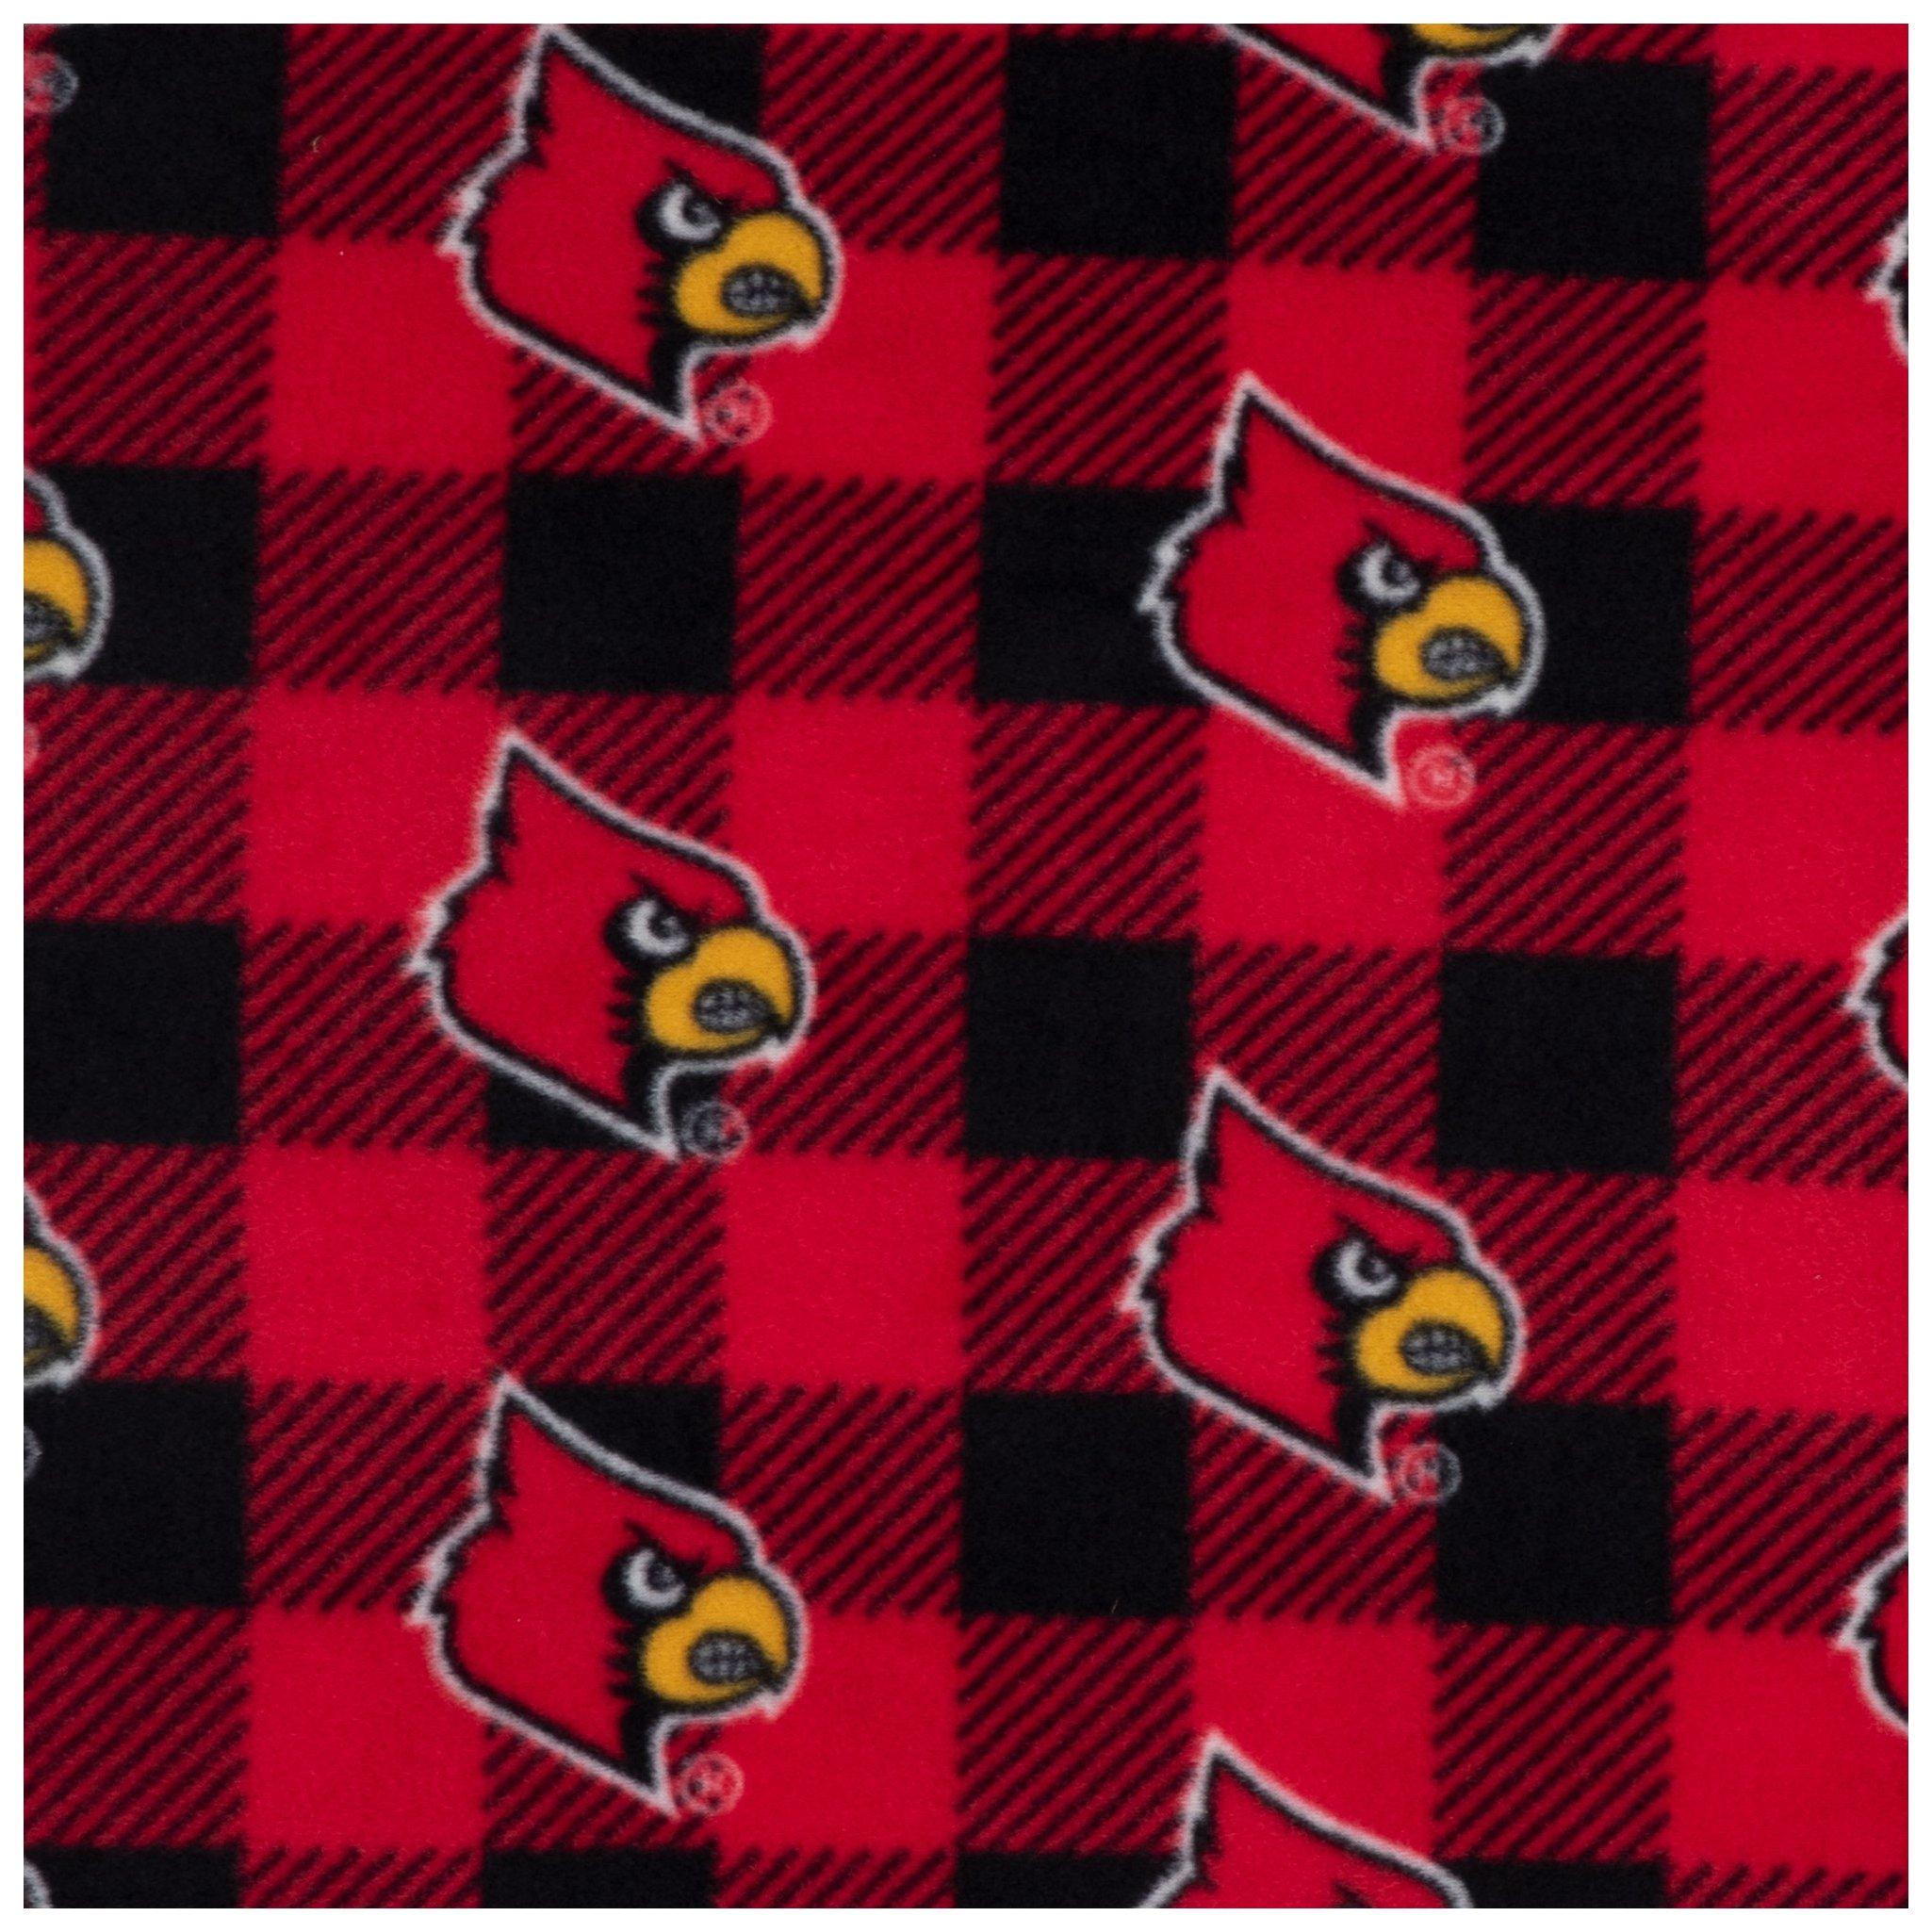 Louisville Cardinals Throw Blankets for Sale